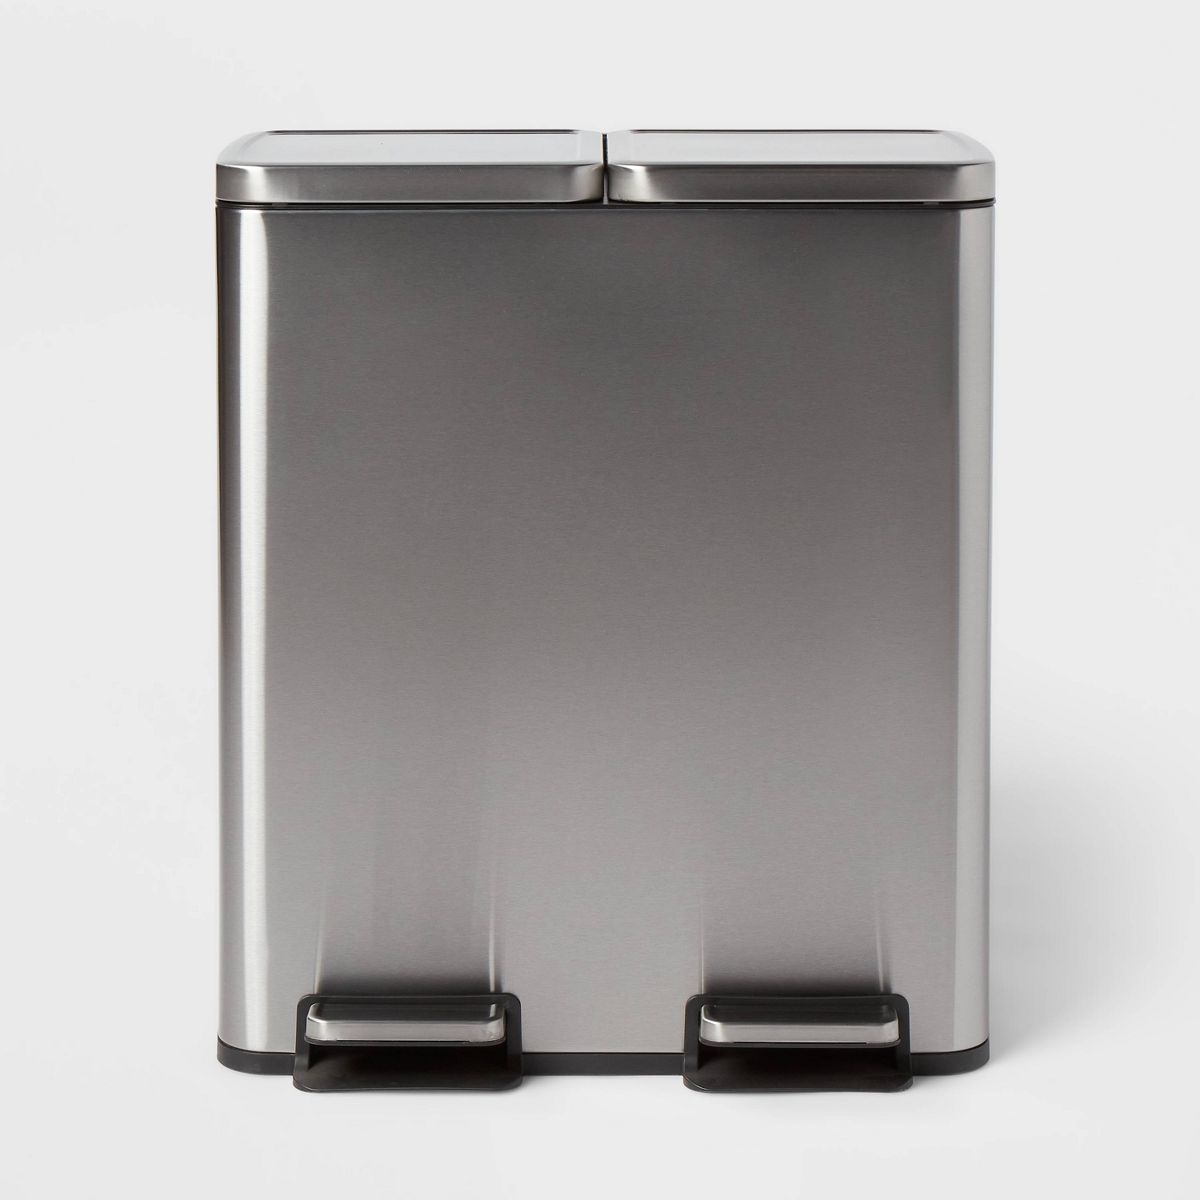 60L Stainless Steel Step Trash and Recycle Can - Brightroom™ | Target